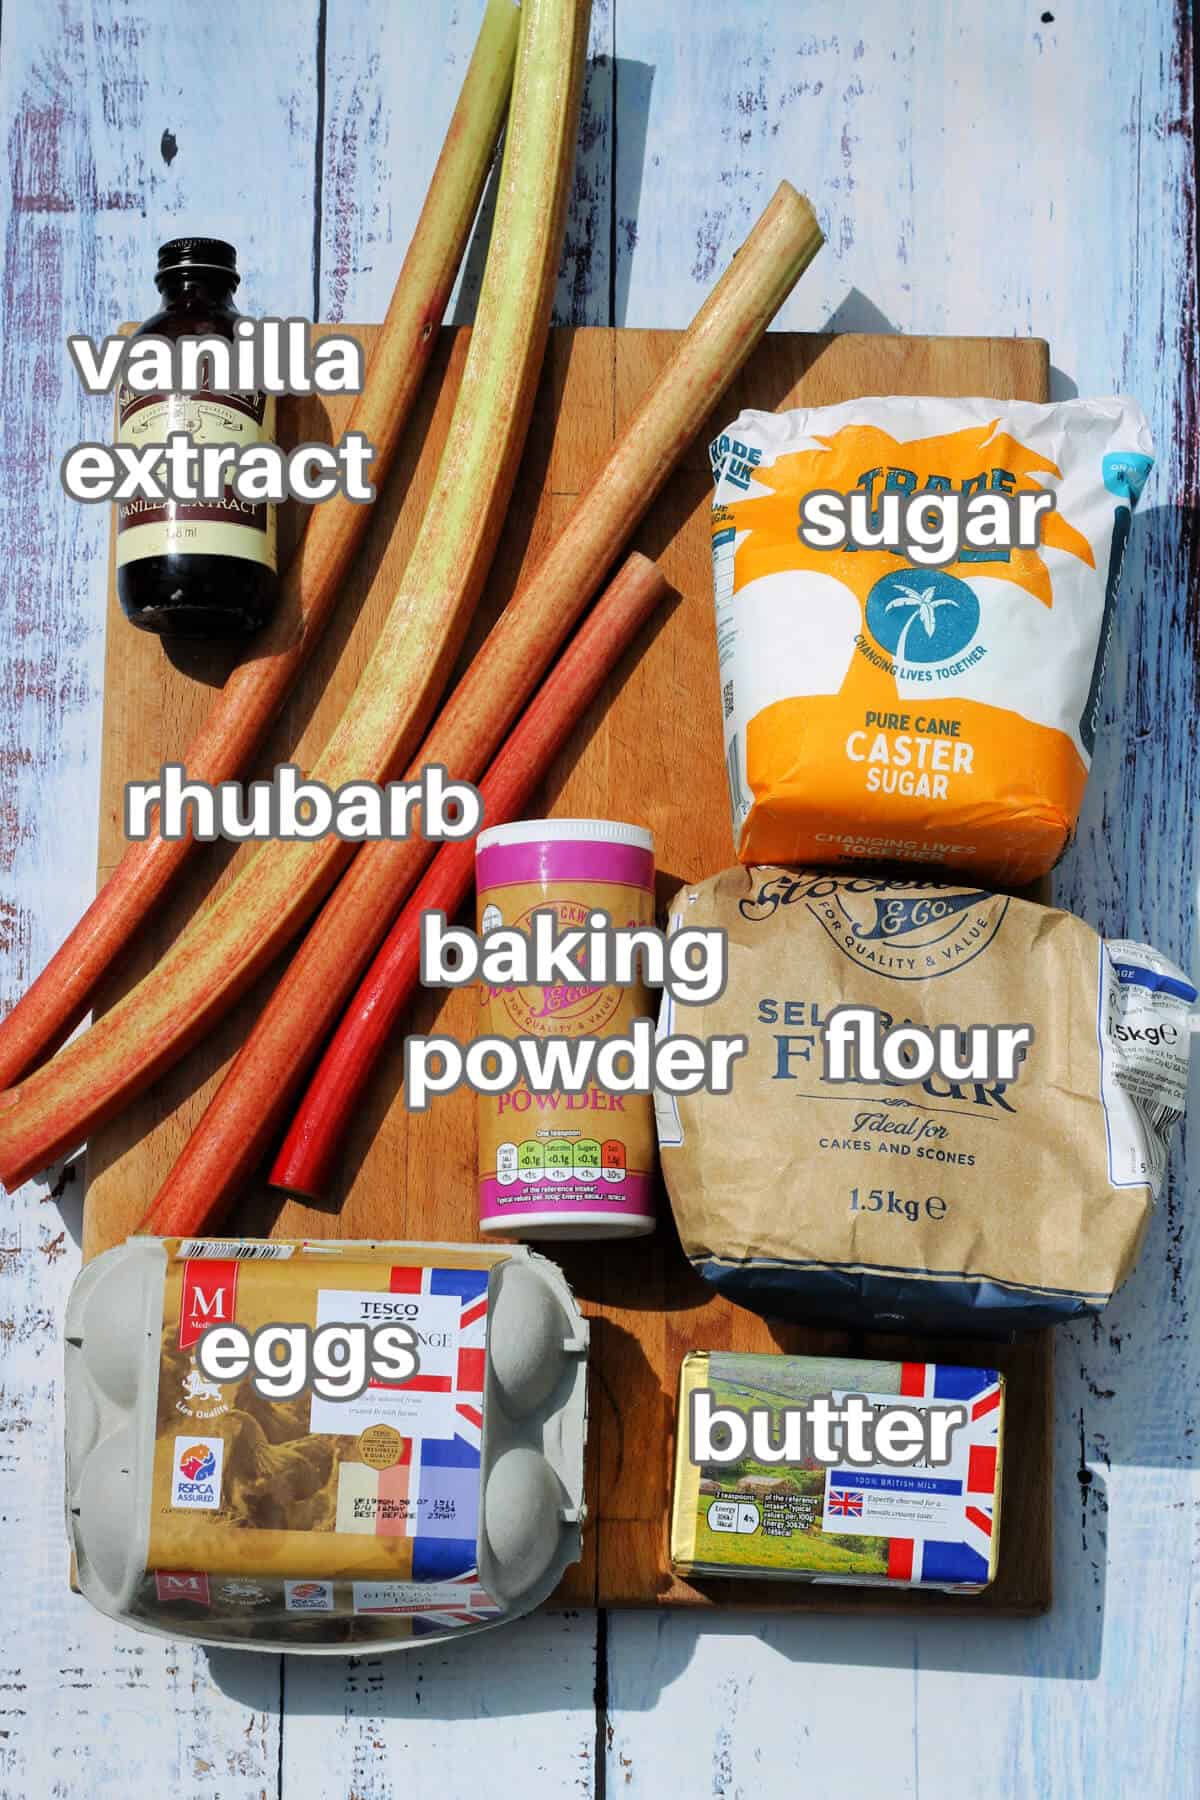 Labelled ingredients on a wooden board - rhubarb, sugar, flour, baking powder, eggs, butter, vanilla extract.